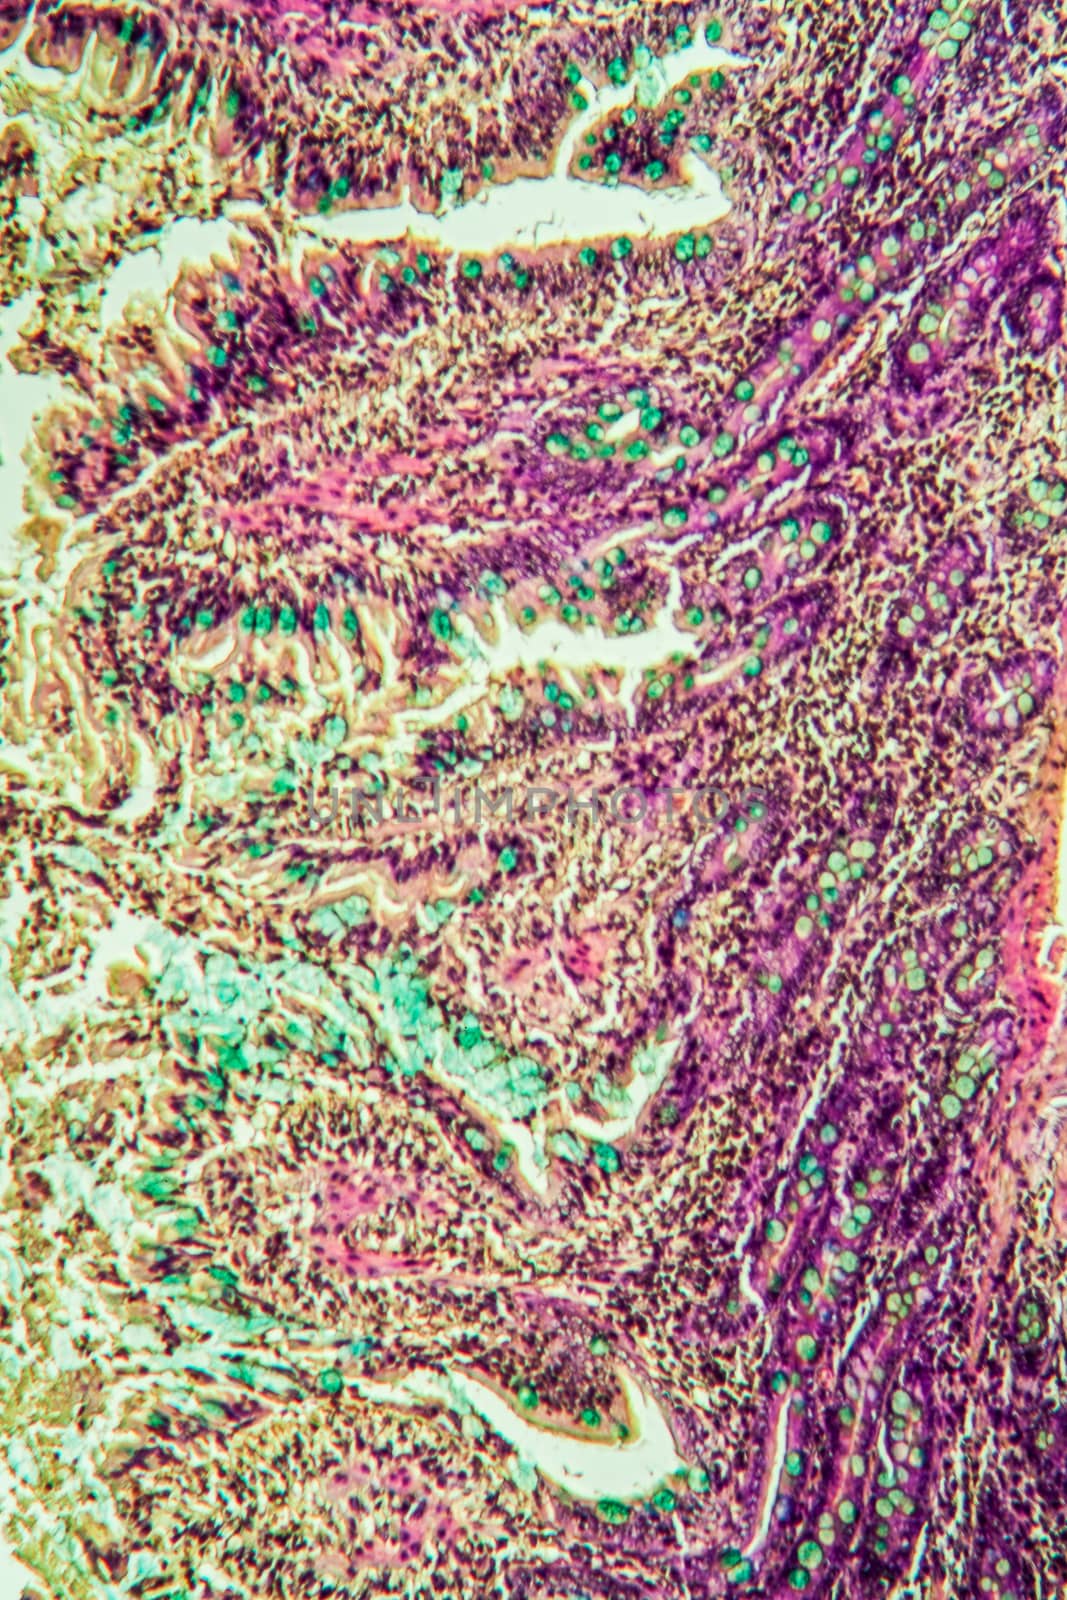 Small intestine pig tissue across 100x by Dr-Lange